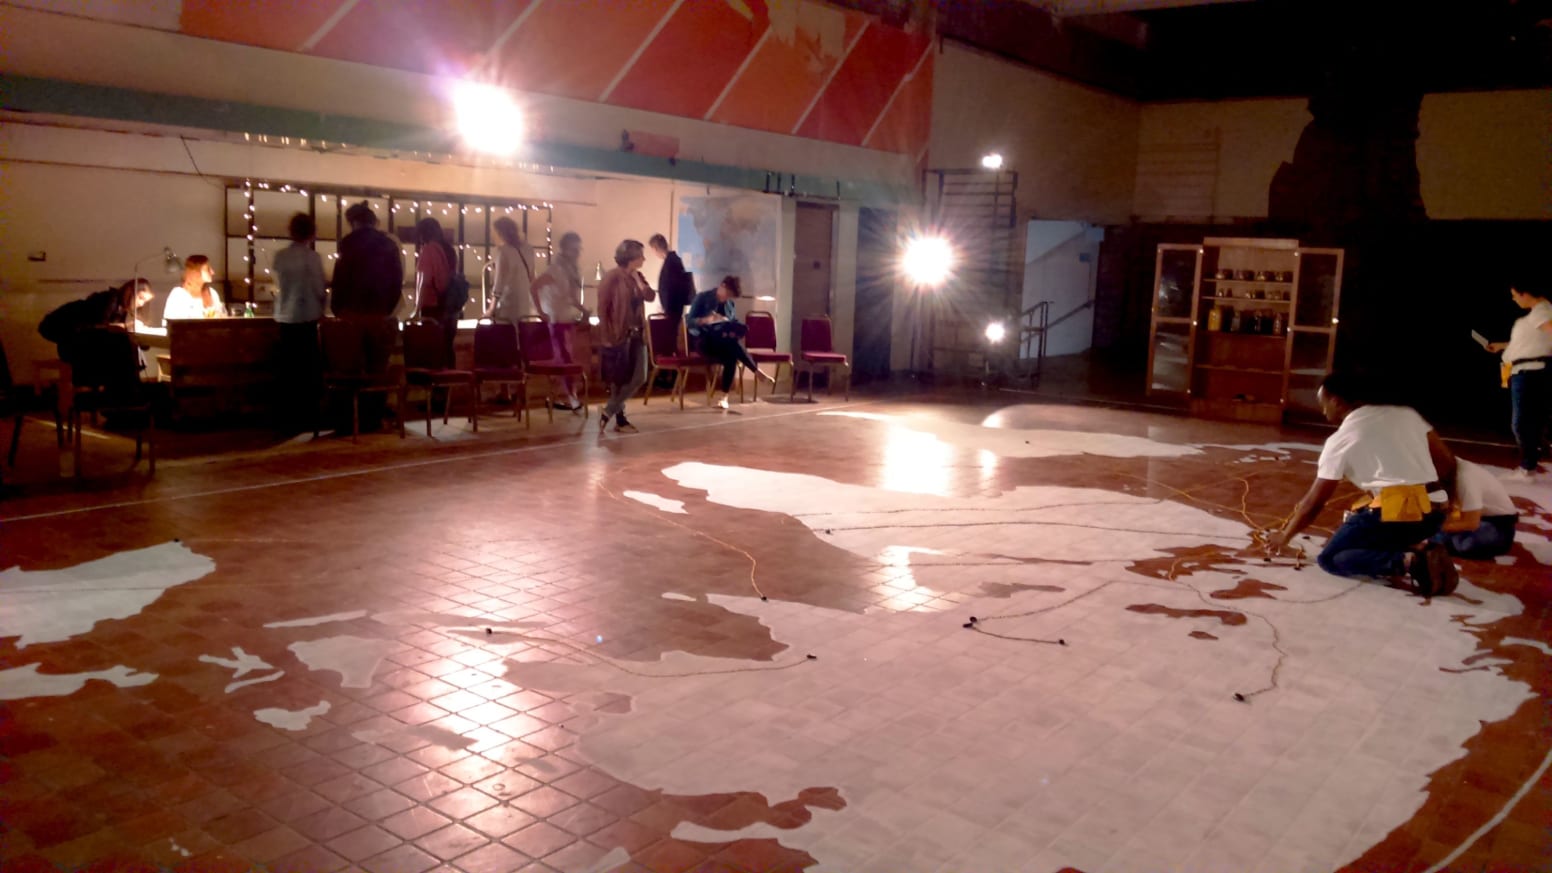 A photo of a large white map drawn onto a tiled floor. A person adding details to the map and people standing around the room